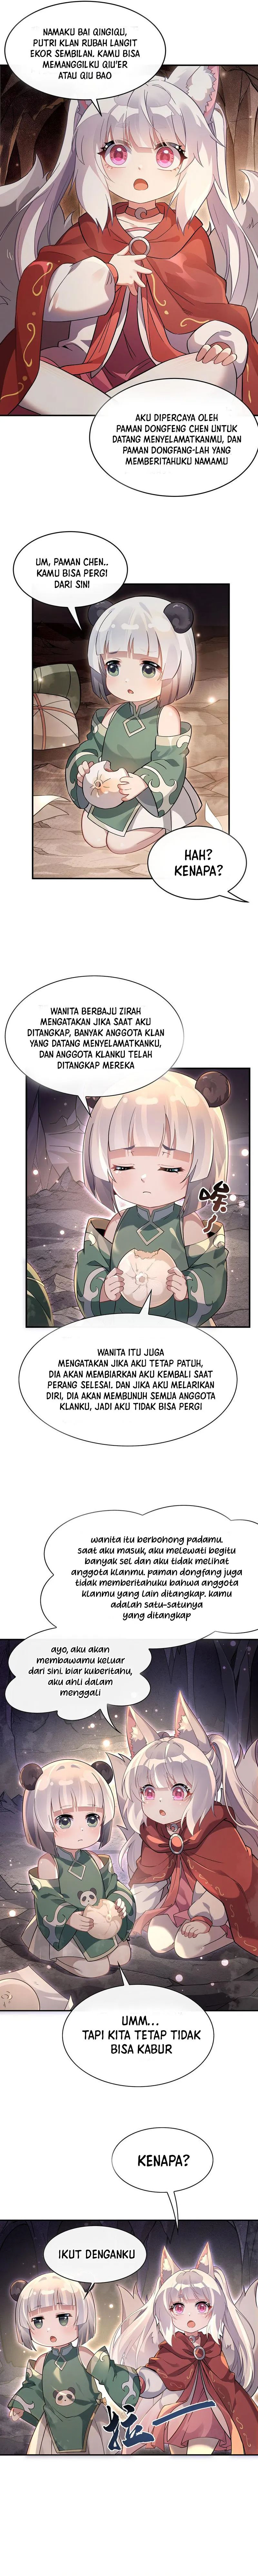 Dilarang COPAS - situs resmi www.mangacanblog.com - Komik my female apprentices are all big shots from the future 215 - chapter 215 216 Indonesia my female apprentices are all big shots from the future 215 - chapter 215 Terbaru 4|Baca Manga Komik Indonesia|Mangacan